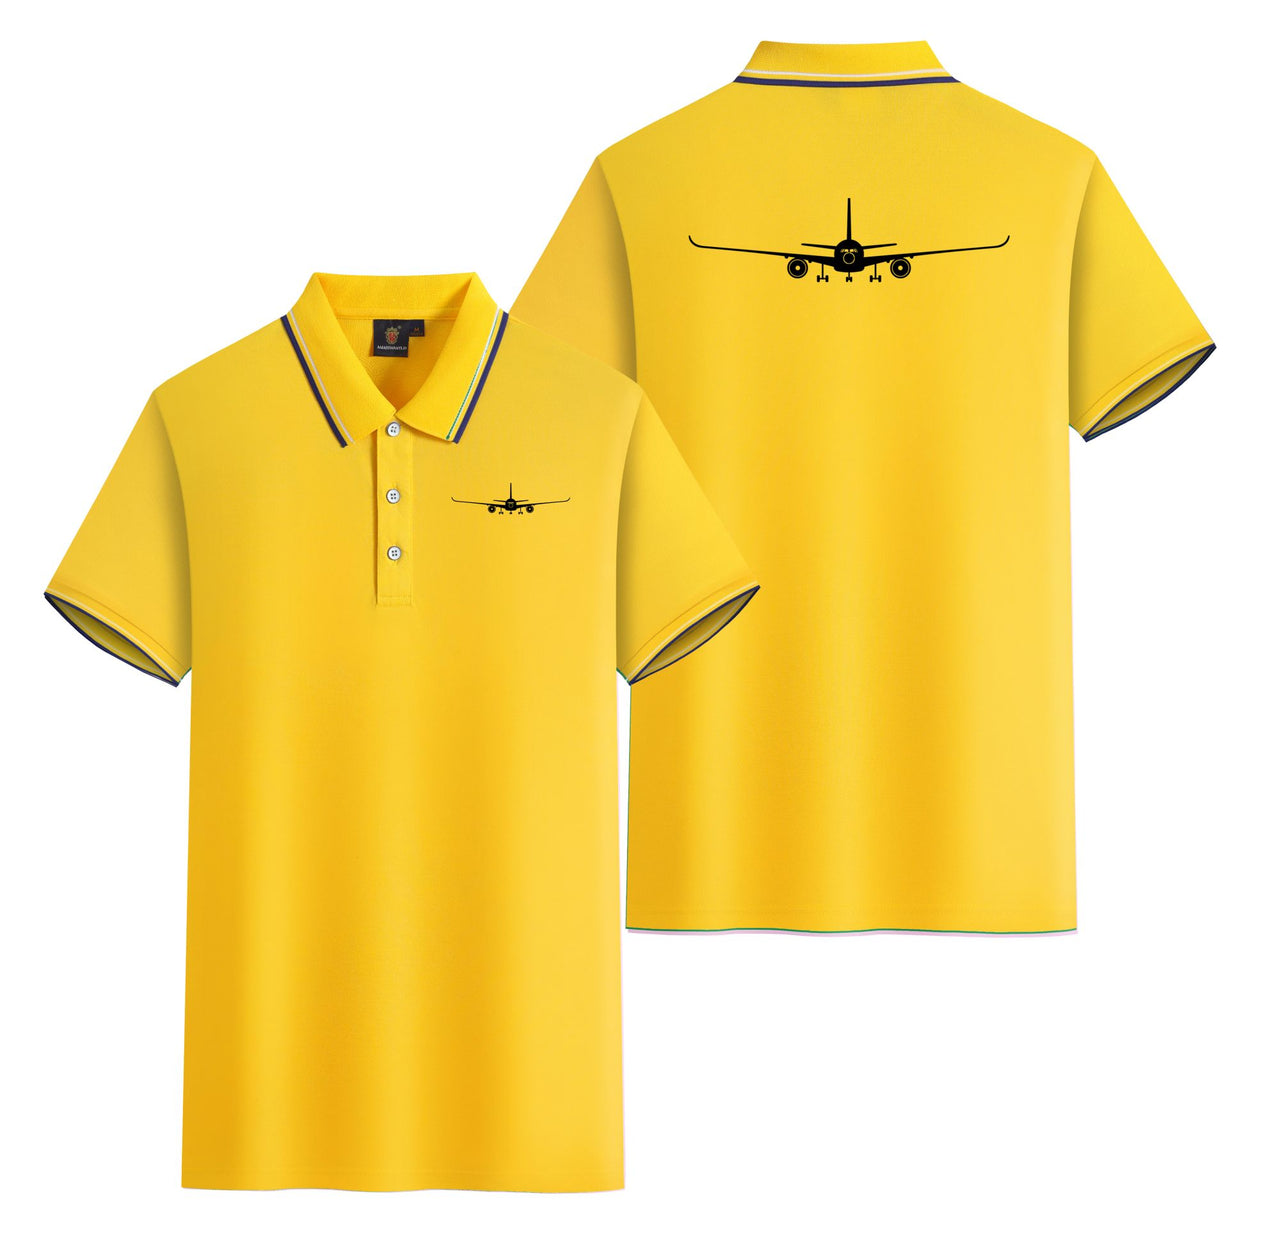 Airbus A350 Silhouette Designed Stylish Polo T-Shirts (Double-Side)